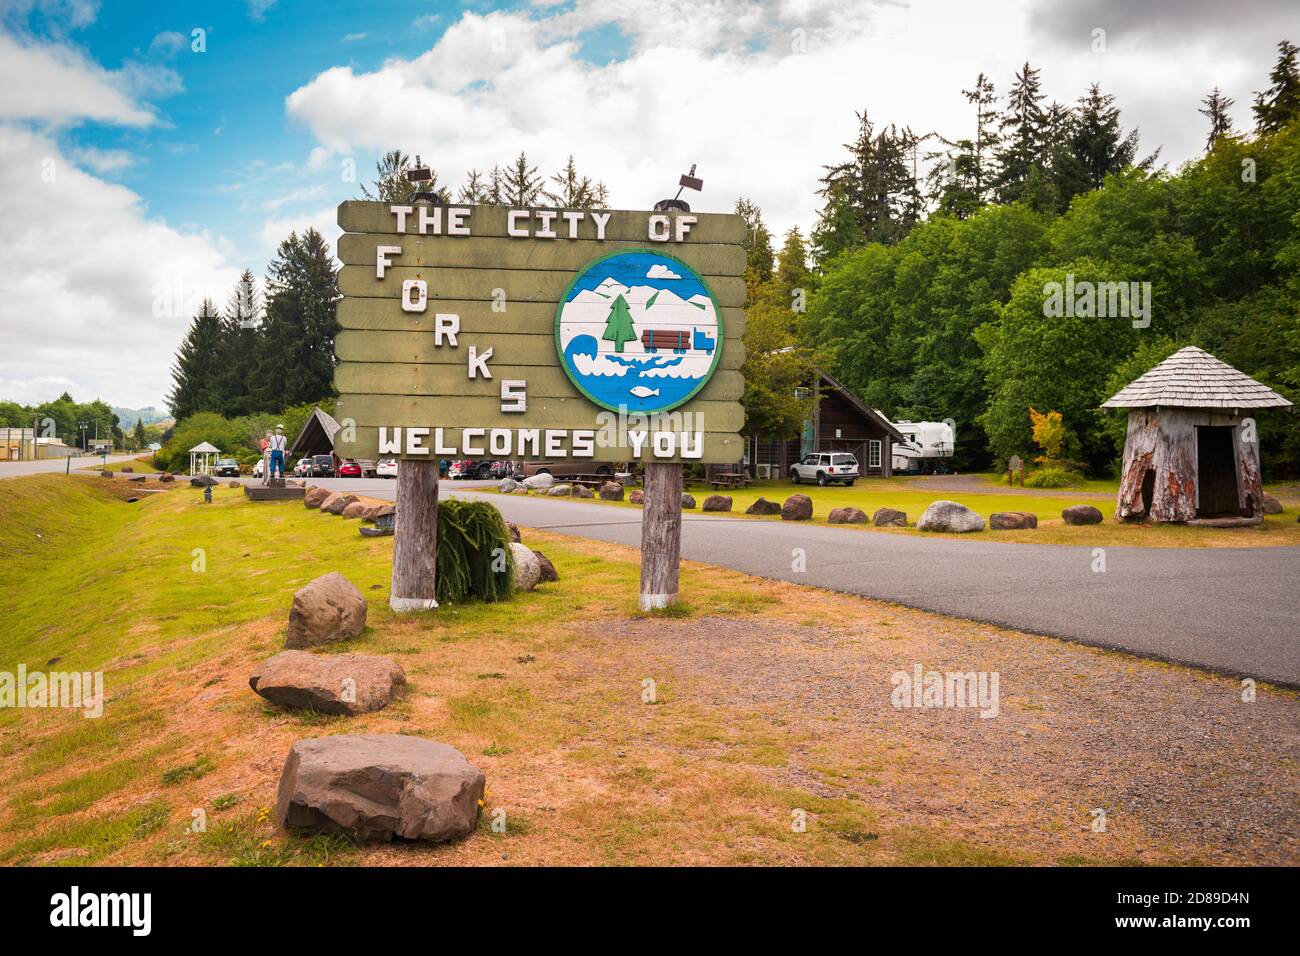 FORKS, WASHINGTON - JUNE 27, 2018: Welcome sign reading: 'The City of Forks Welcomes You.' Stock Photo